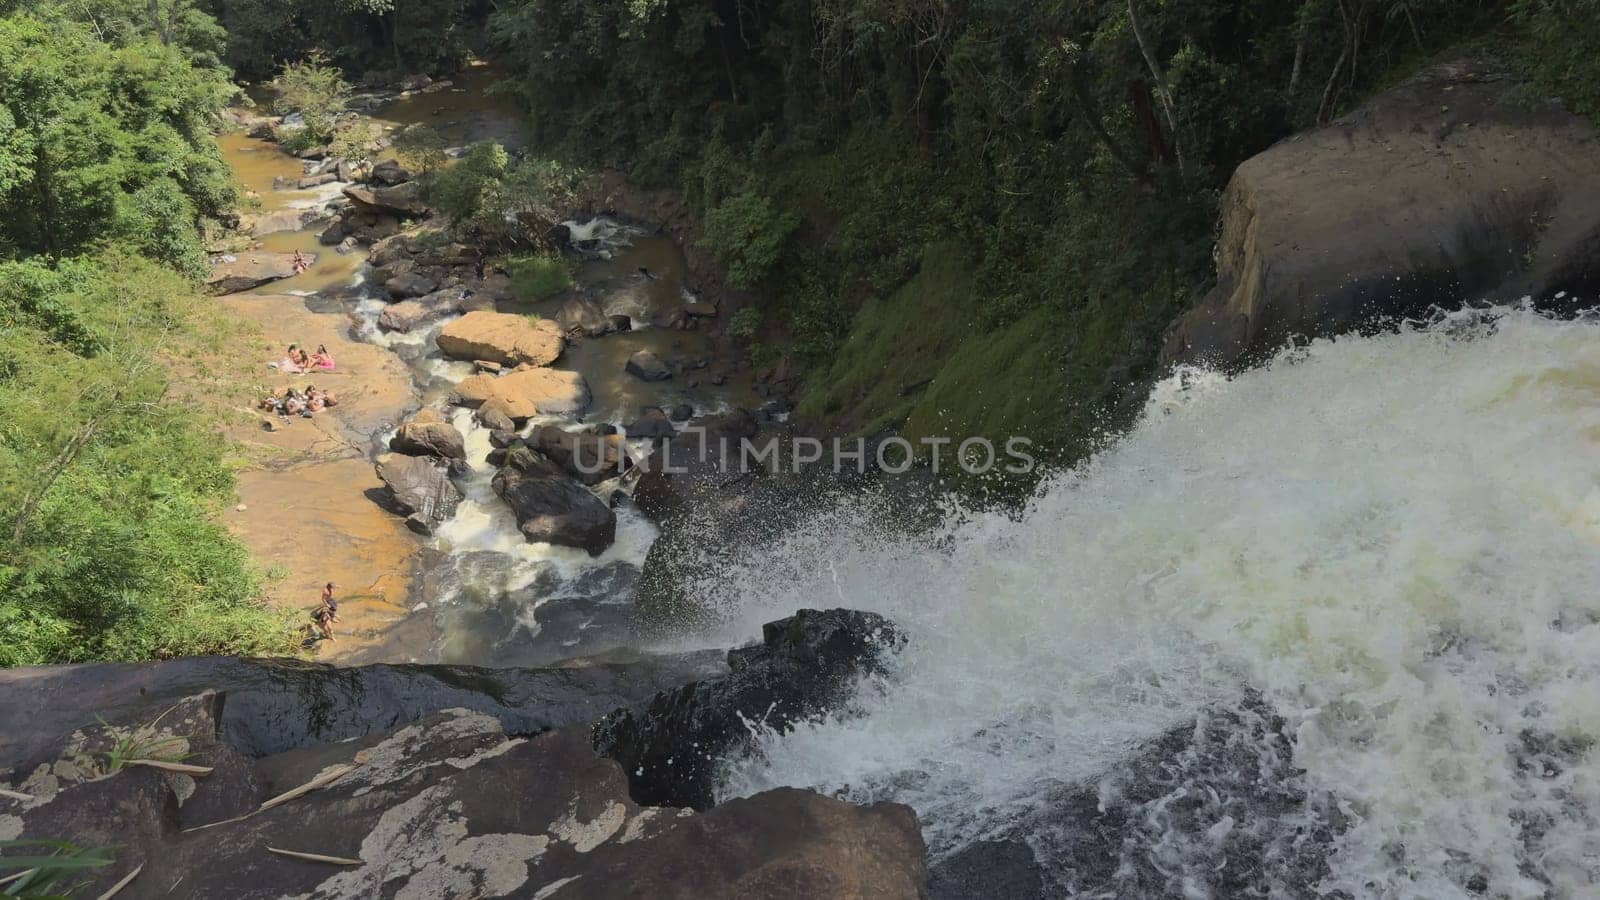 Slow Motion of Waterfall in Jungle with People Bathing by FerradalFCG